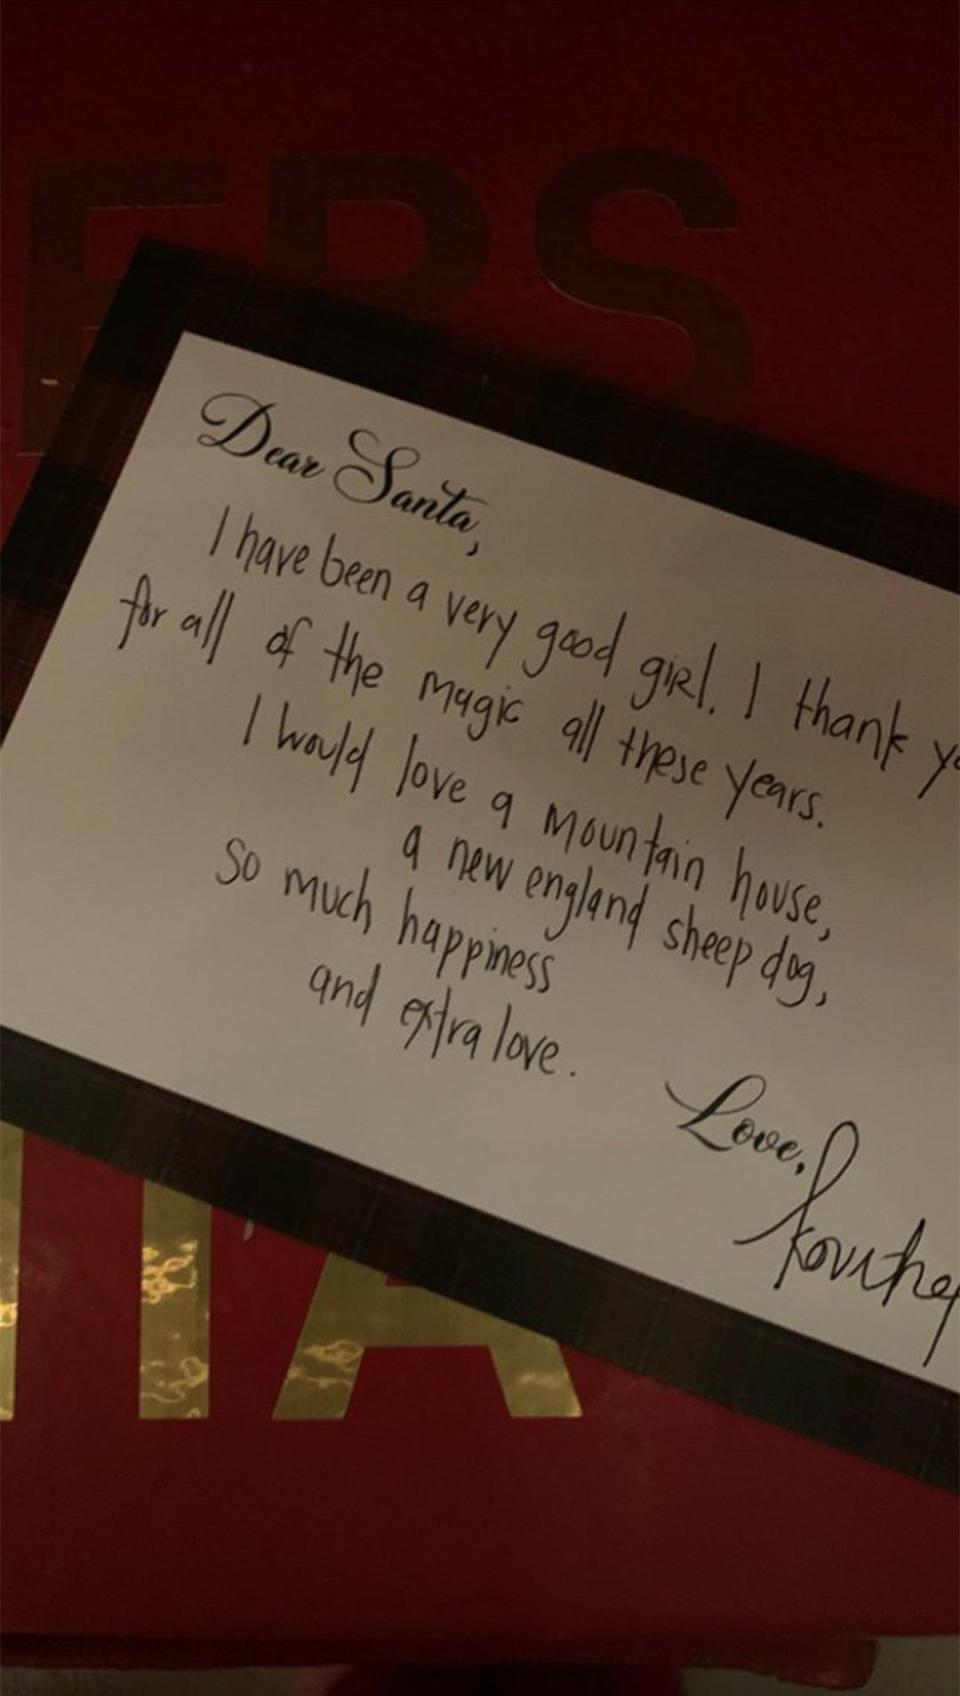 Kourtney wrote Santa a note, asking for "a mountain house and New England sheep dog, so much happiness and extra love." 